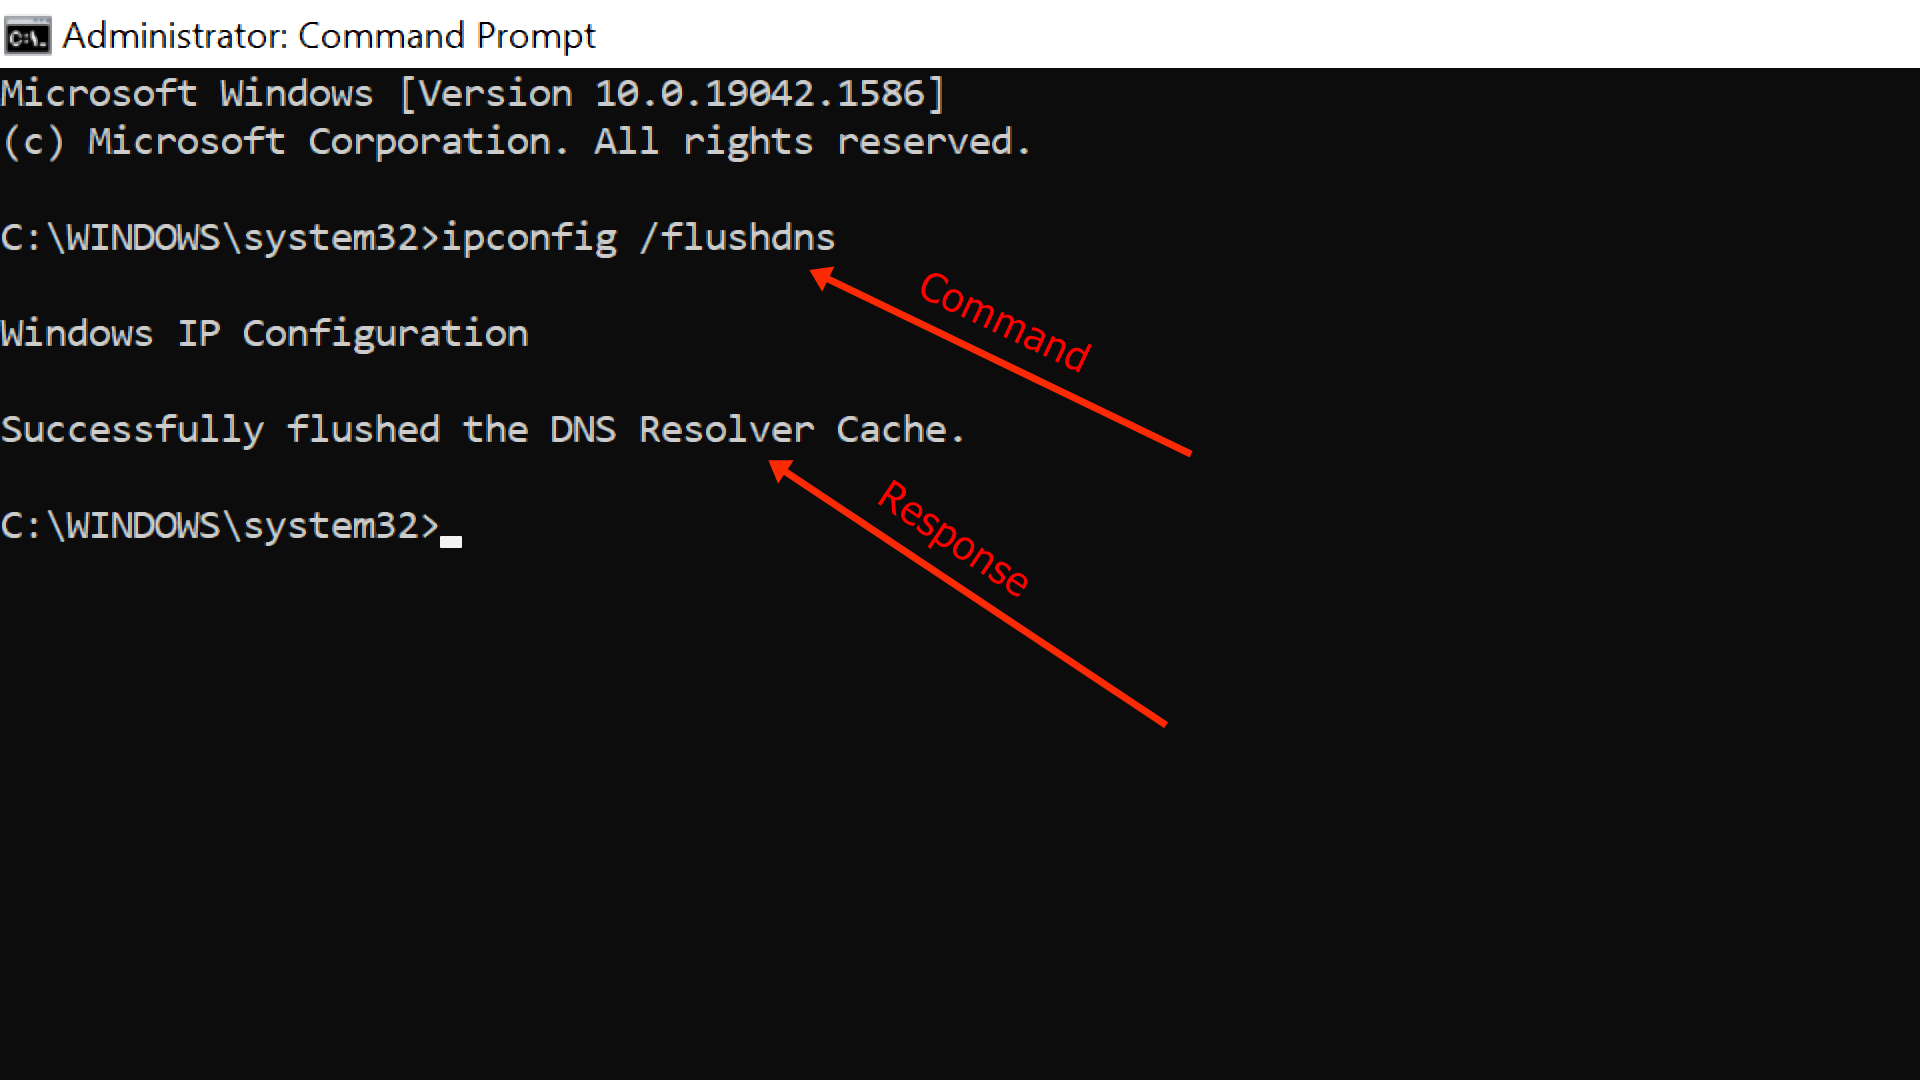 Open the Command Prompt on your computer.
Type "ipconfig /flushdns" and press Enter.